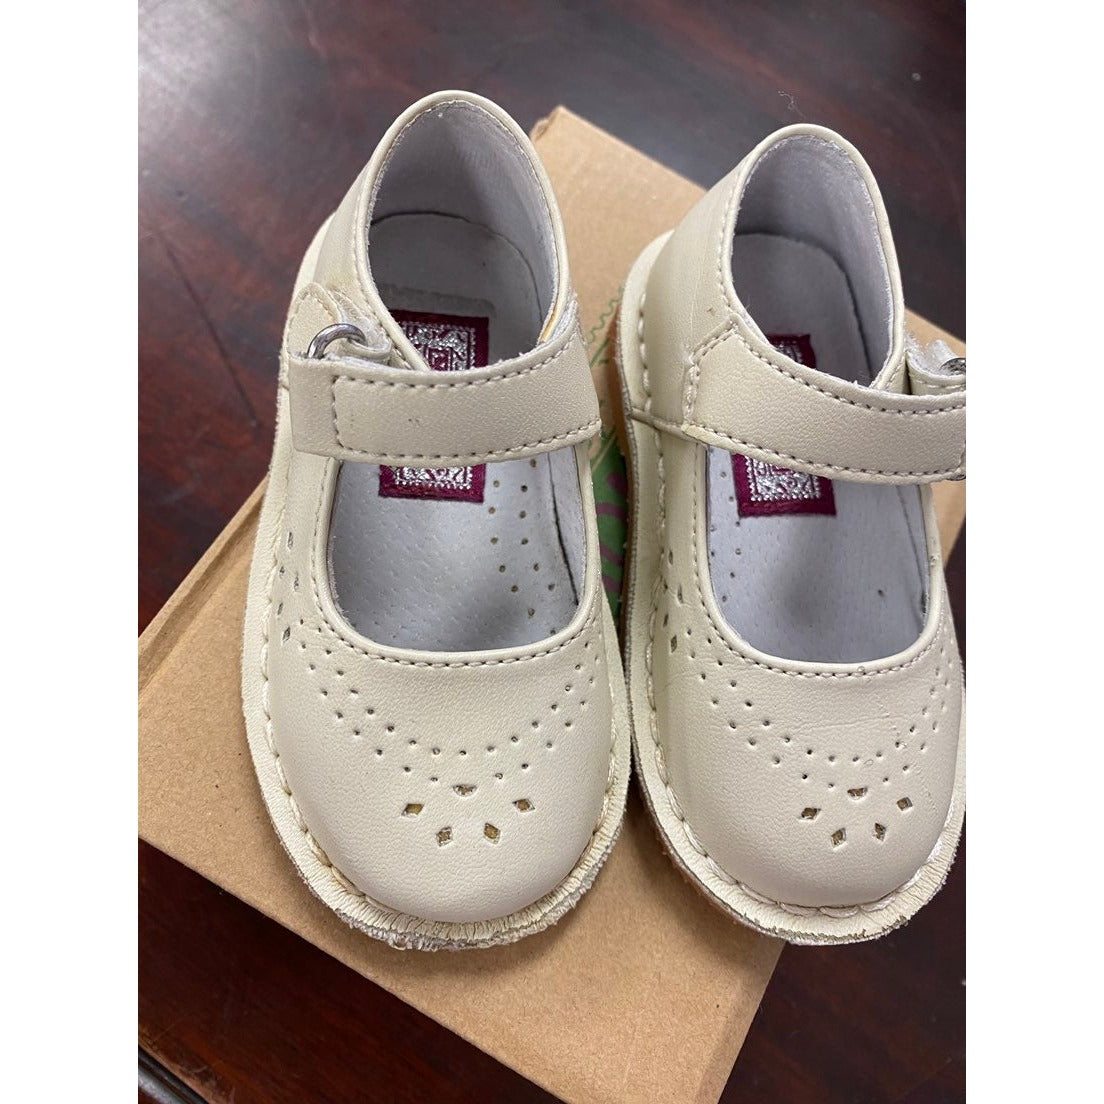 Size 5 L'amour baby girls shoes